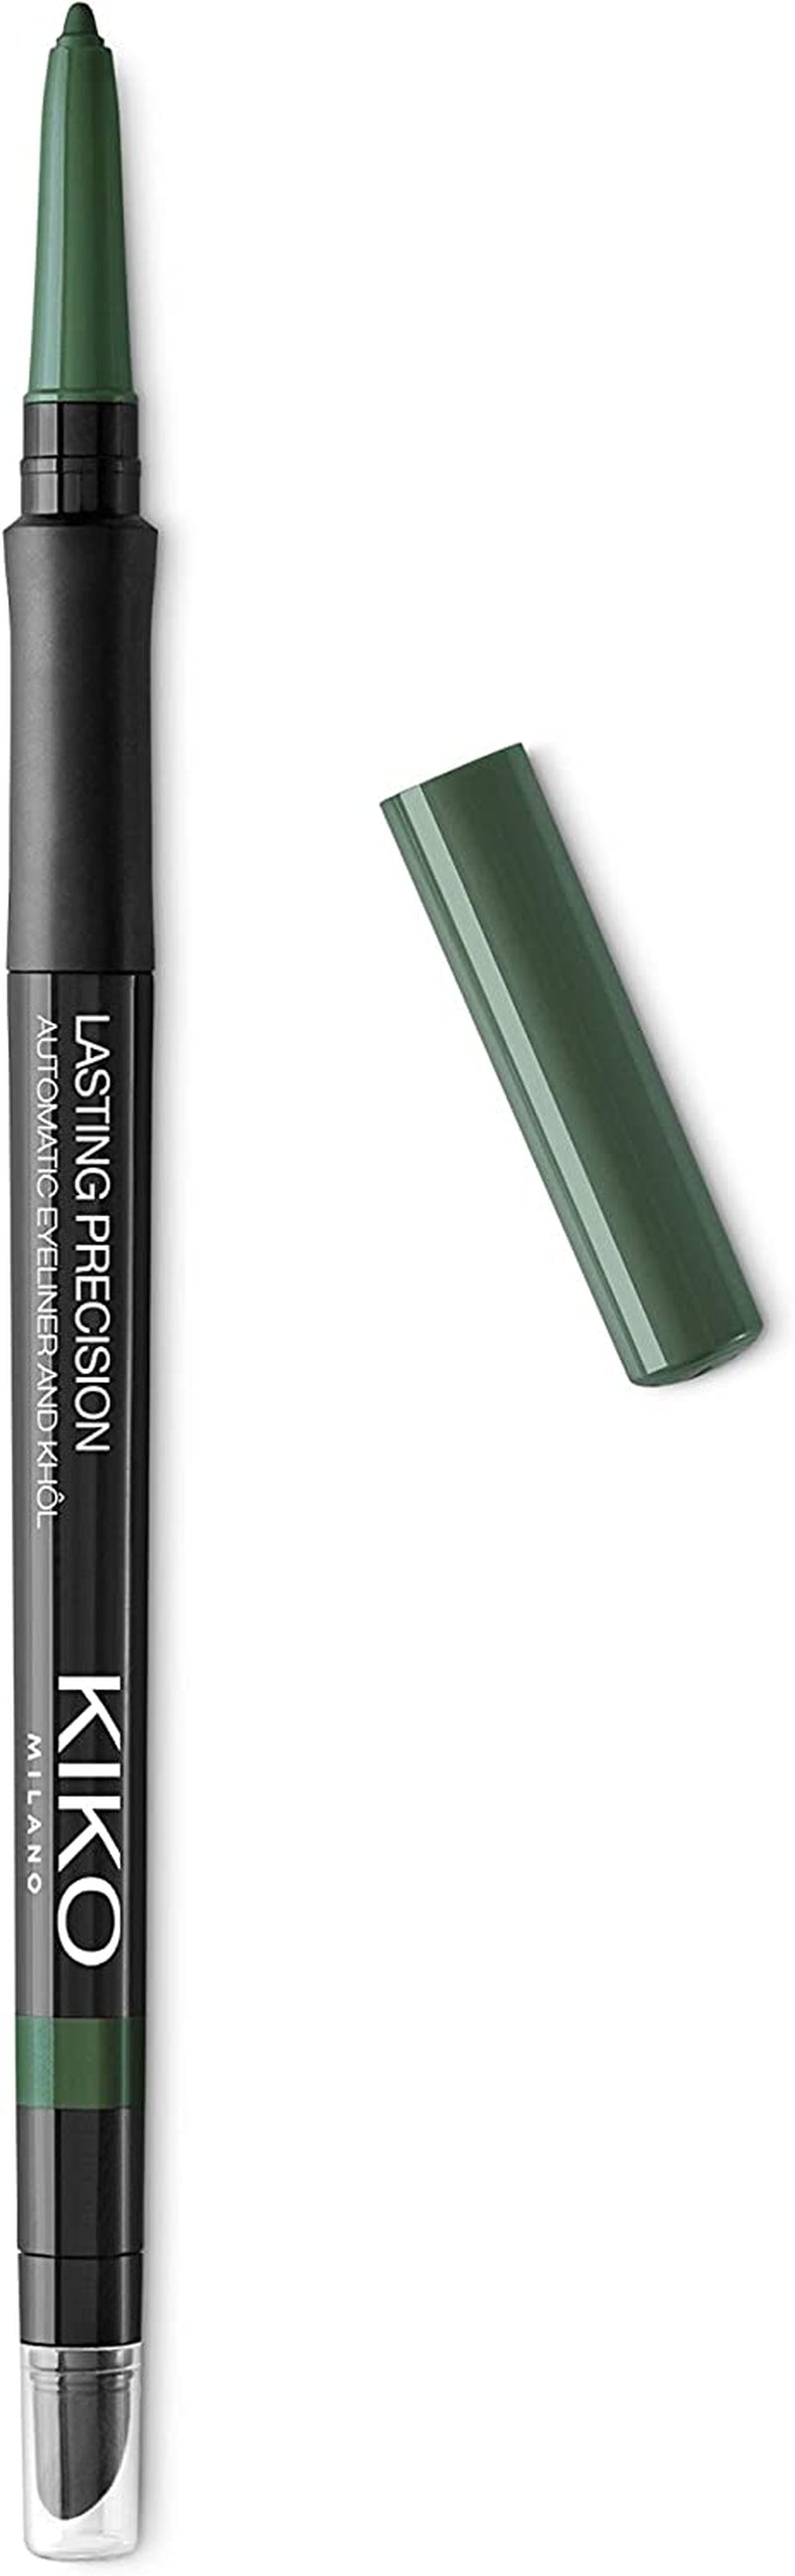 Kiko Milano Lasting Precision Automatic Eyeliner and Khôl 11 | Automatic Eye Pencil for the Waterline and Lash Line